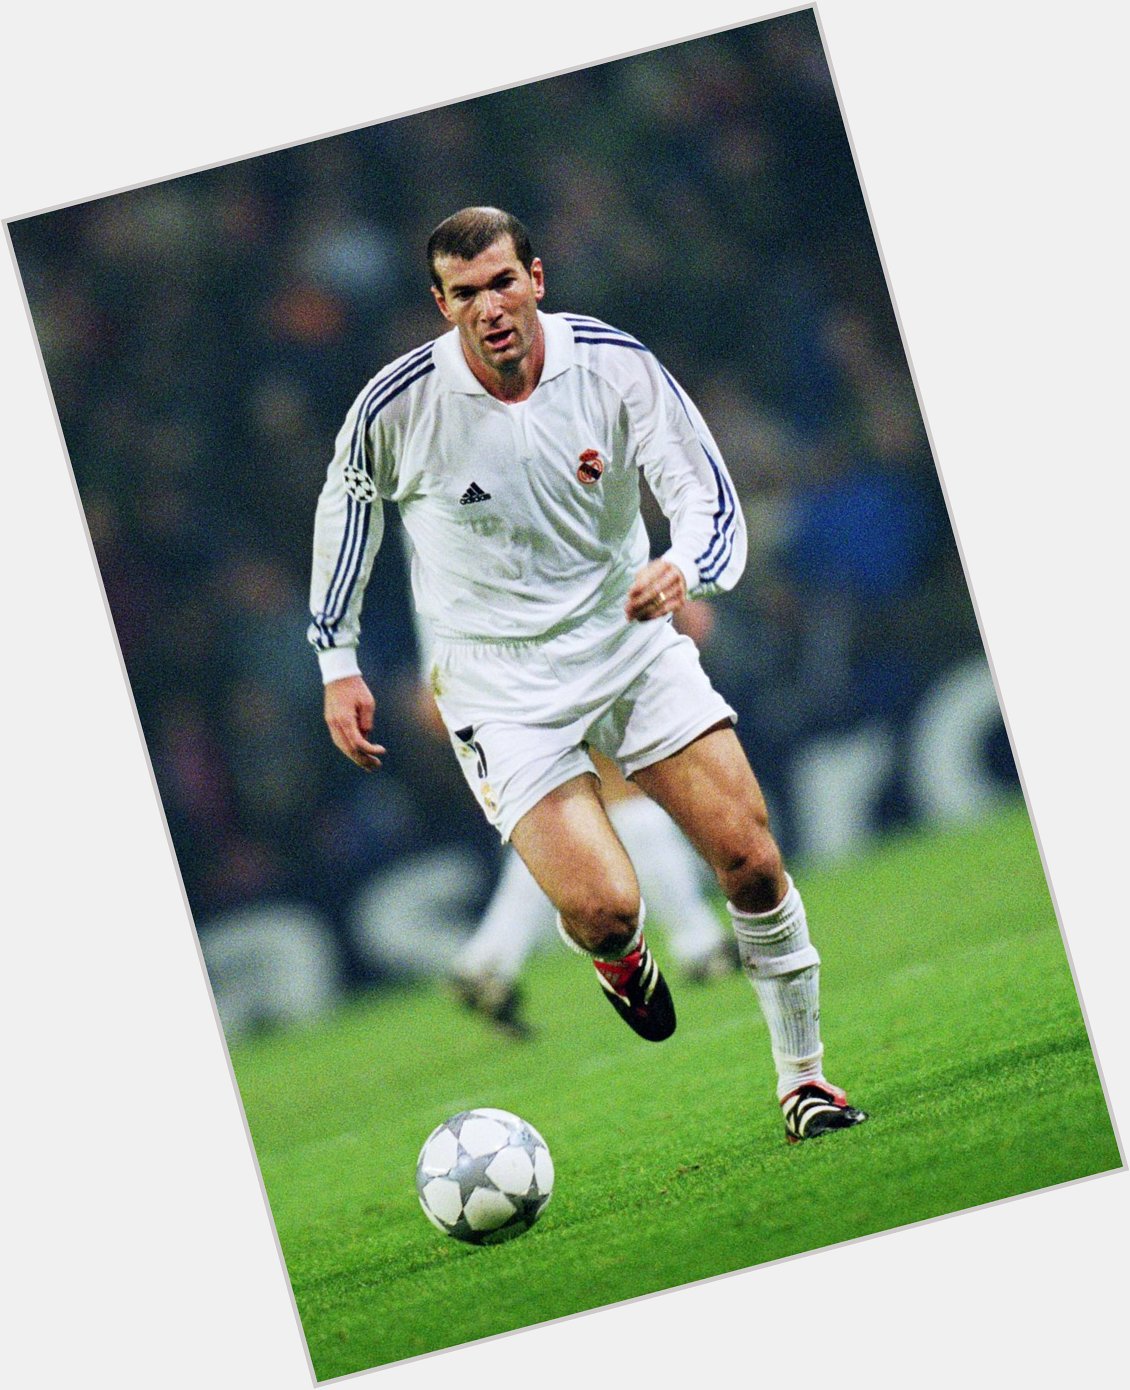 Happy Birthday to one of my favorites of all time, Zinedine Zidane. One of One. We love you, thank you.

Big 50 !  